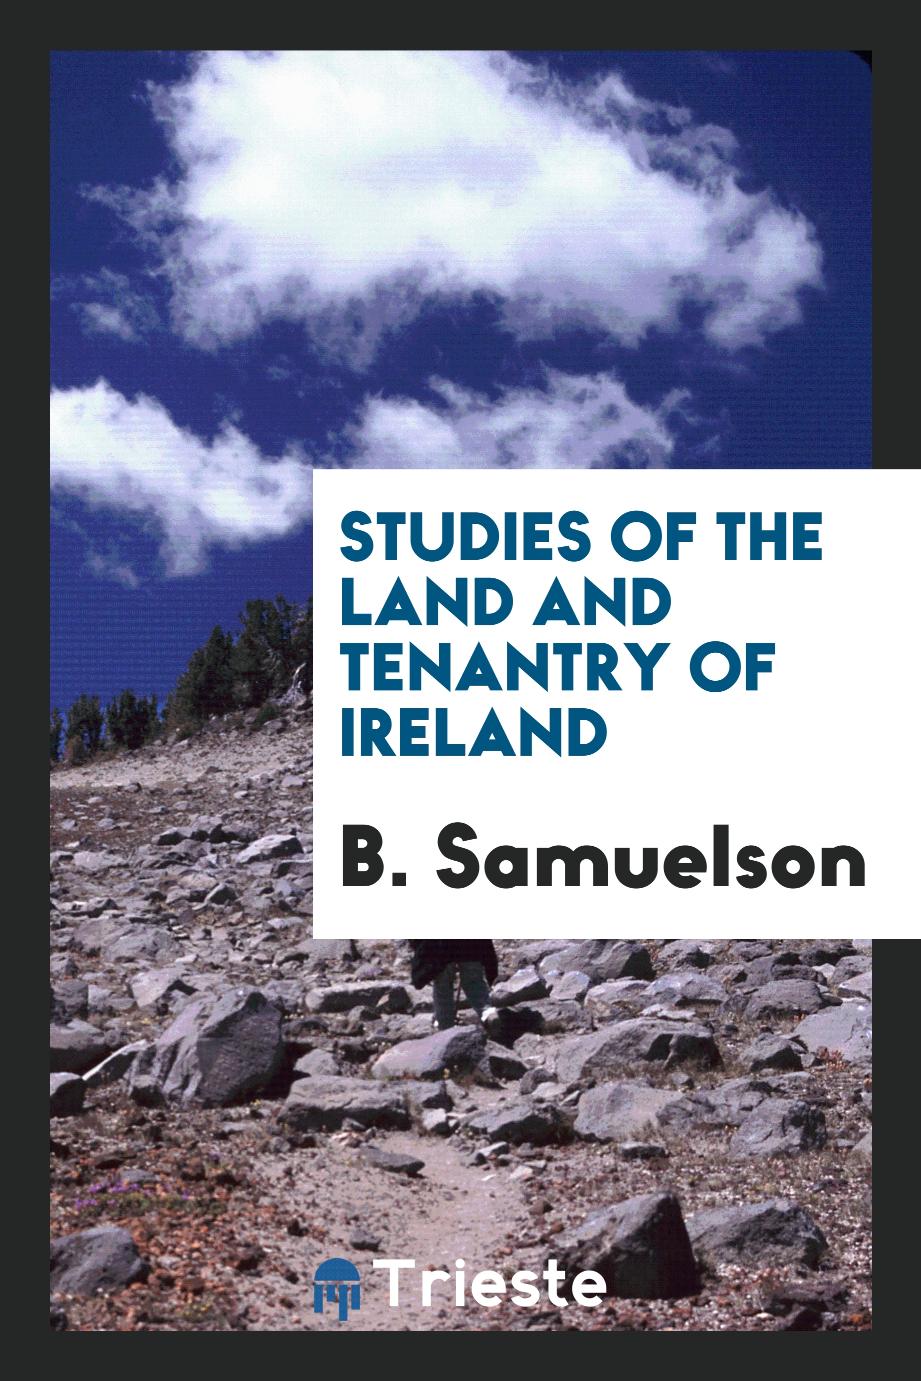 B. Samuelson - Studies of the land and tenantry of Ireland